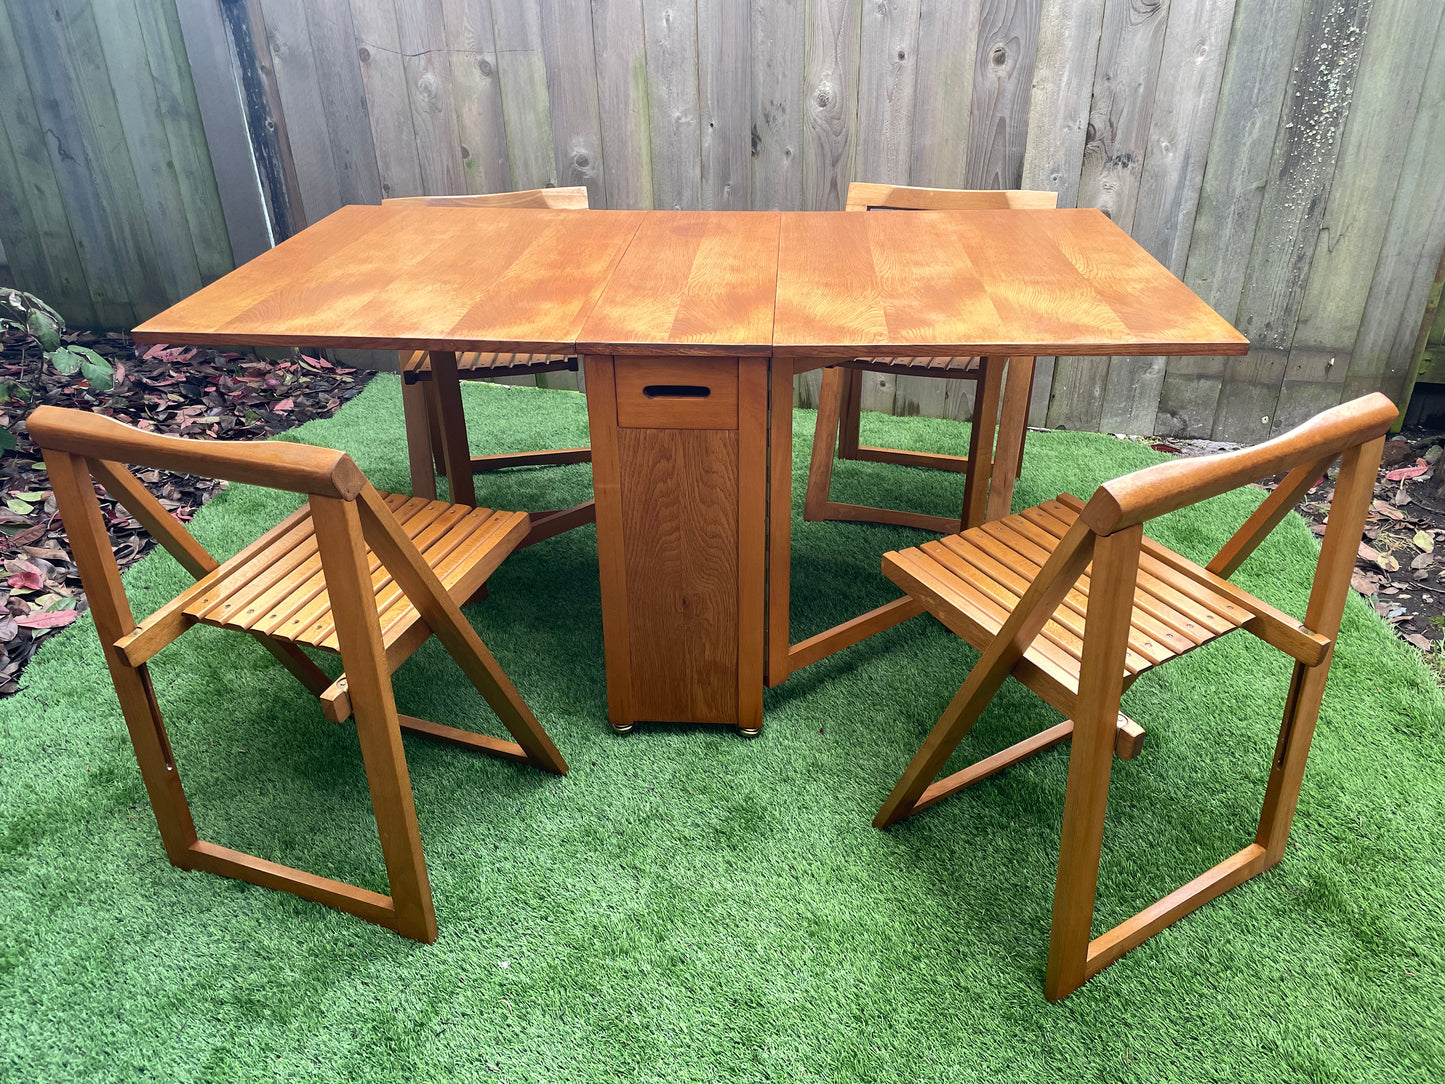 Mid Century Modern Gateleg Drop Leaf Dining Table on Casters With Folding Chairs - 5 Pieces